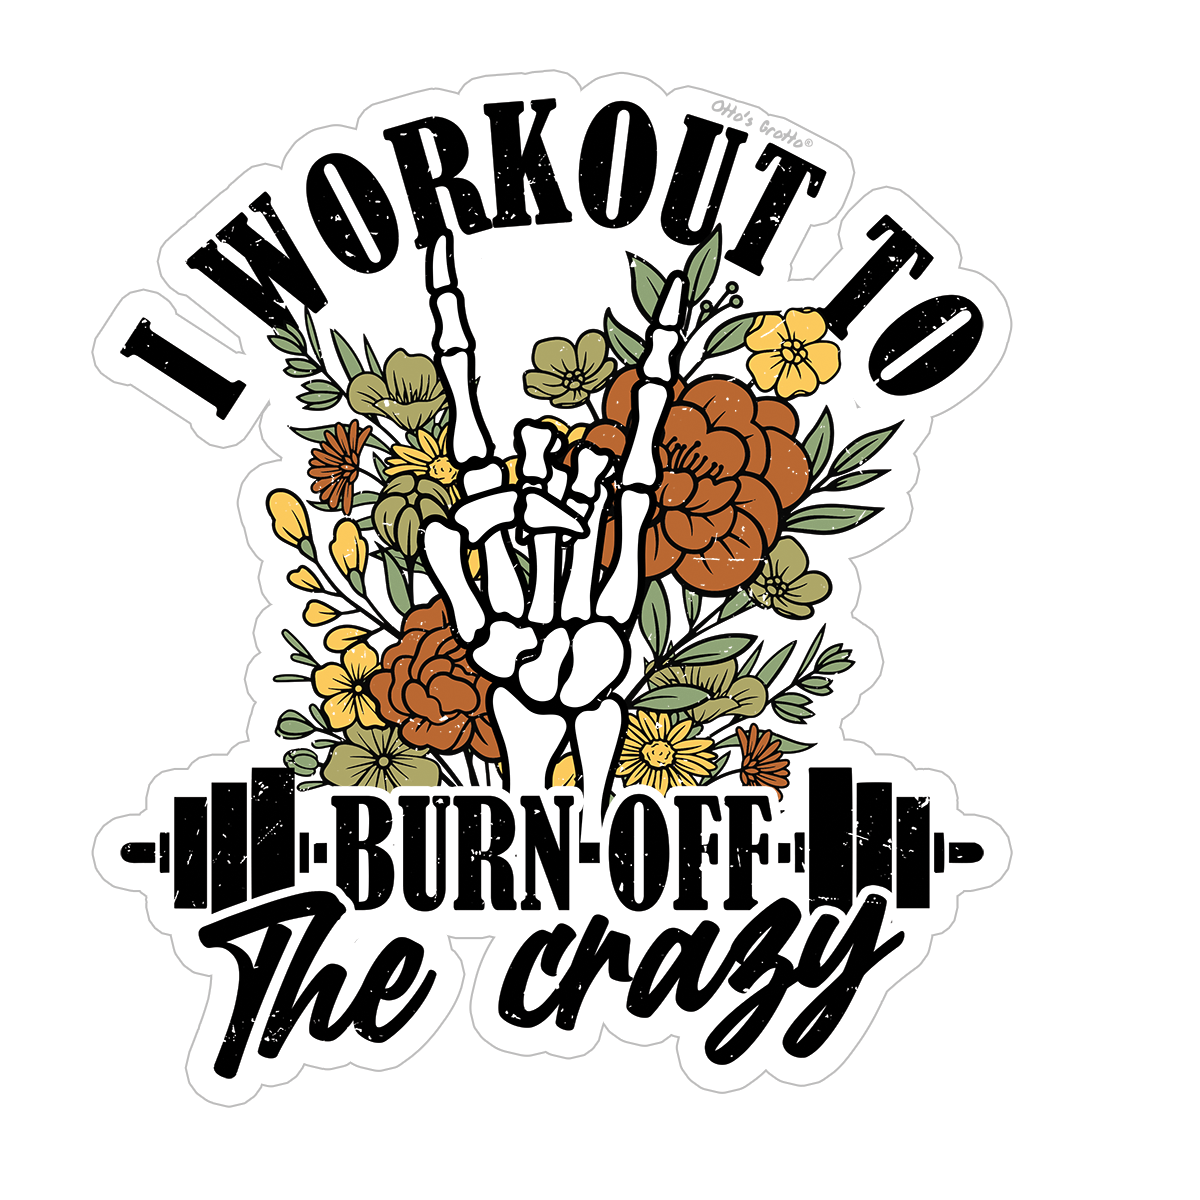 I Workout To Burn Off The Crazy - Sticker for Gym & Weightlifting for Girls Women featuring skeleton hand, weights, flowers